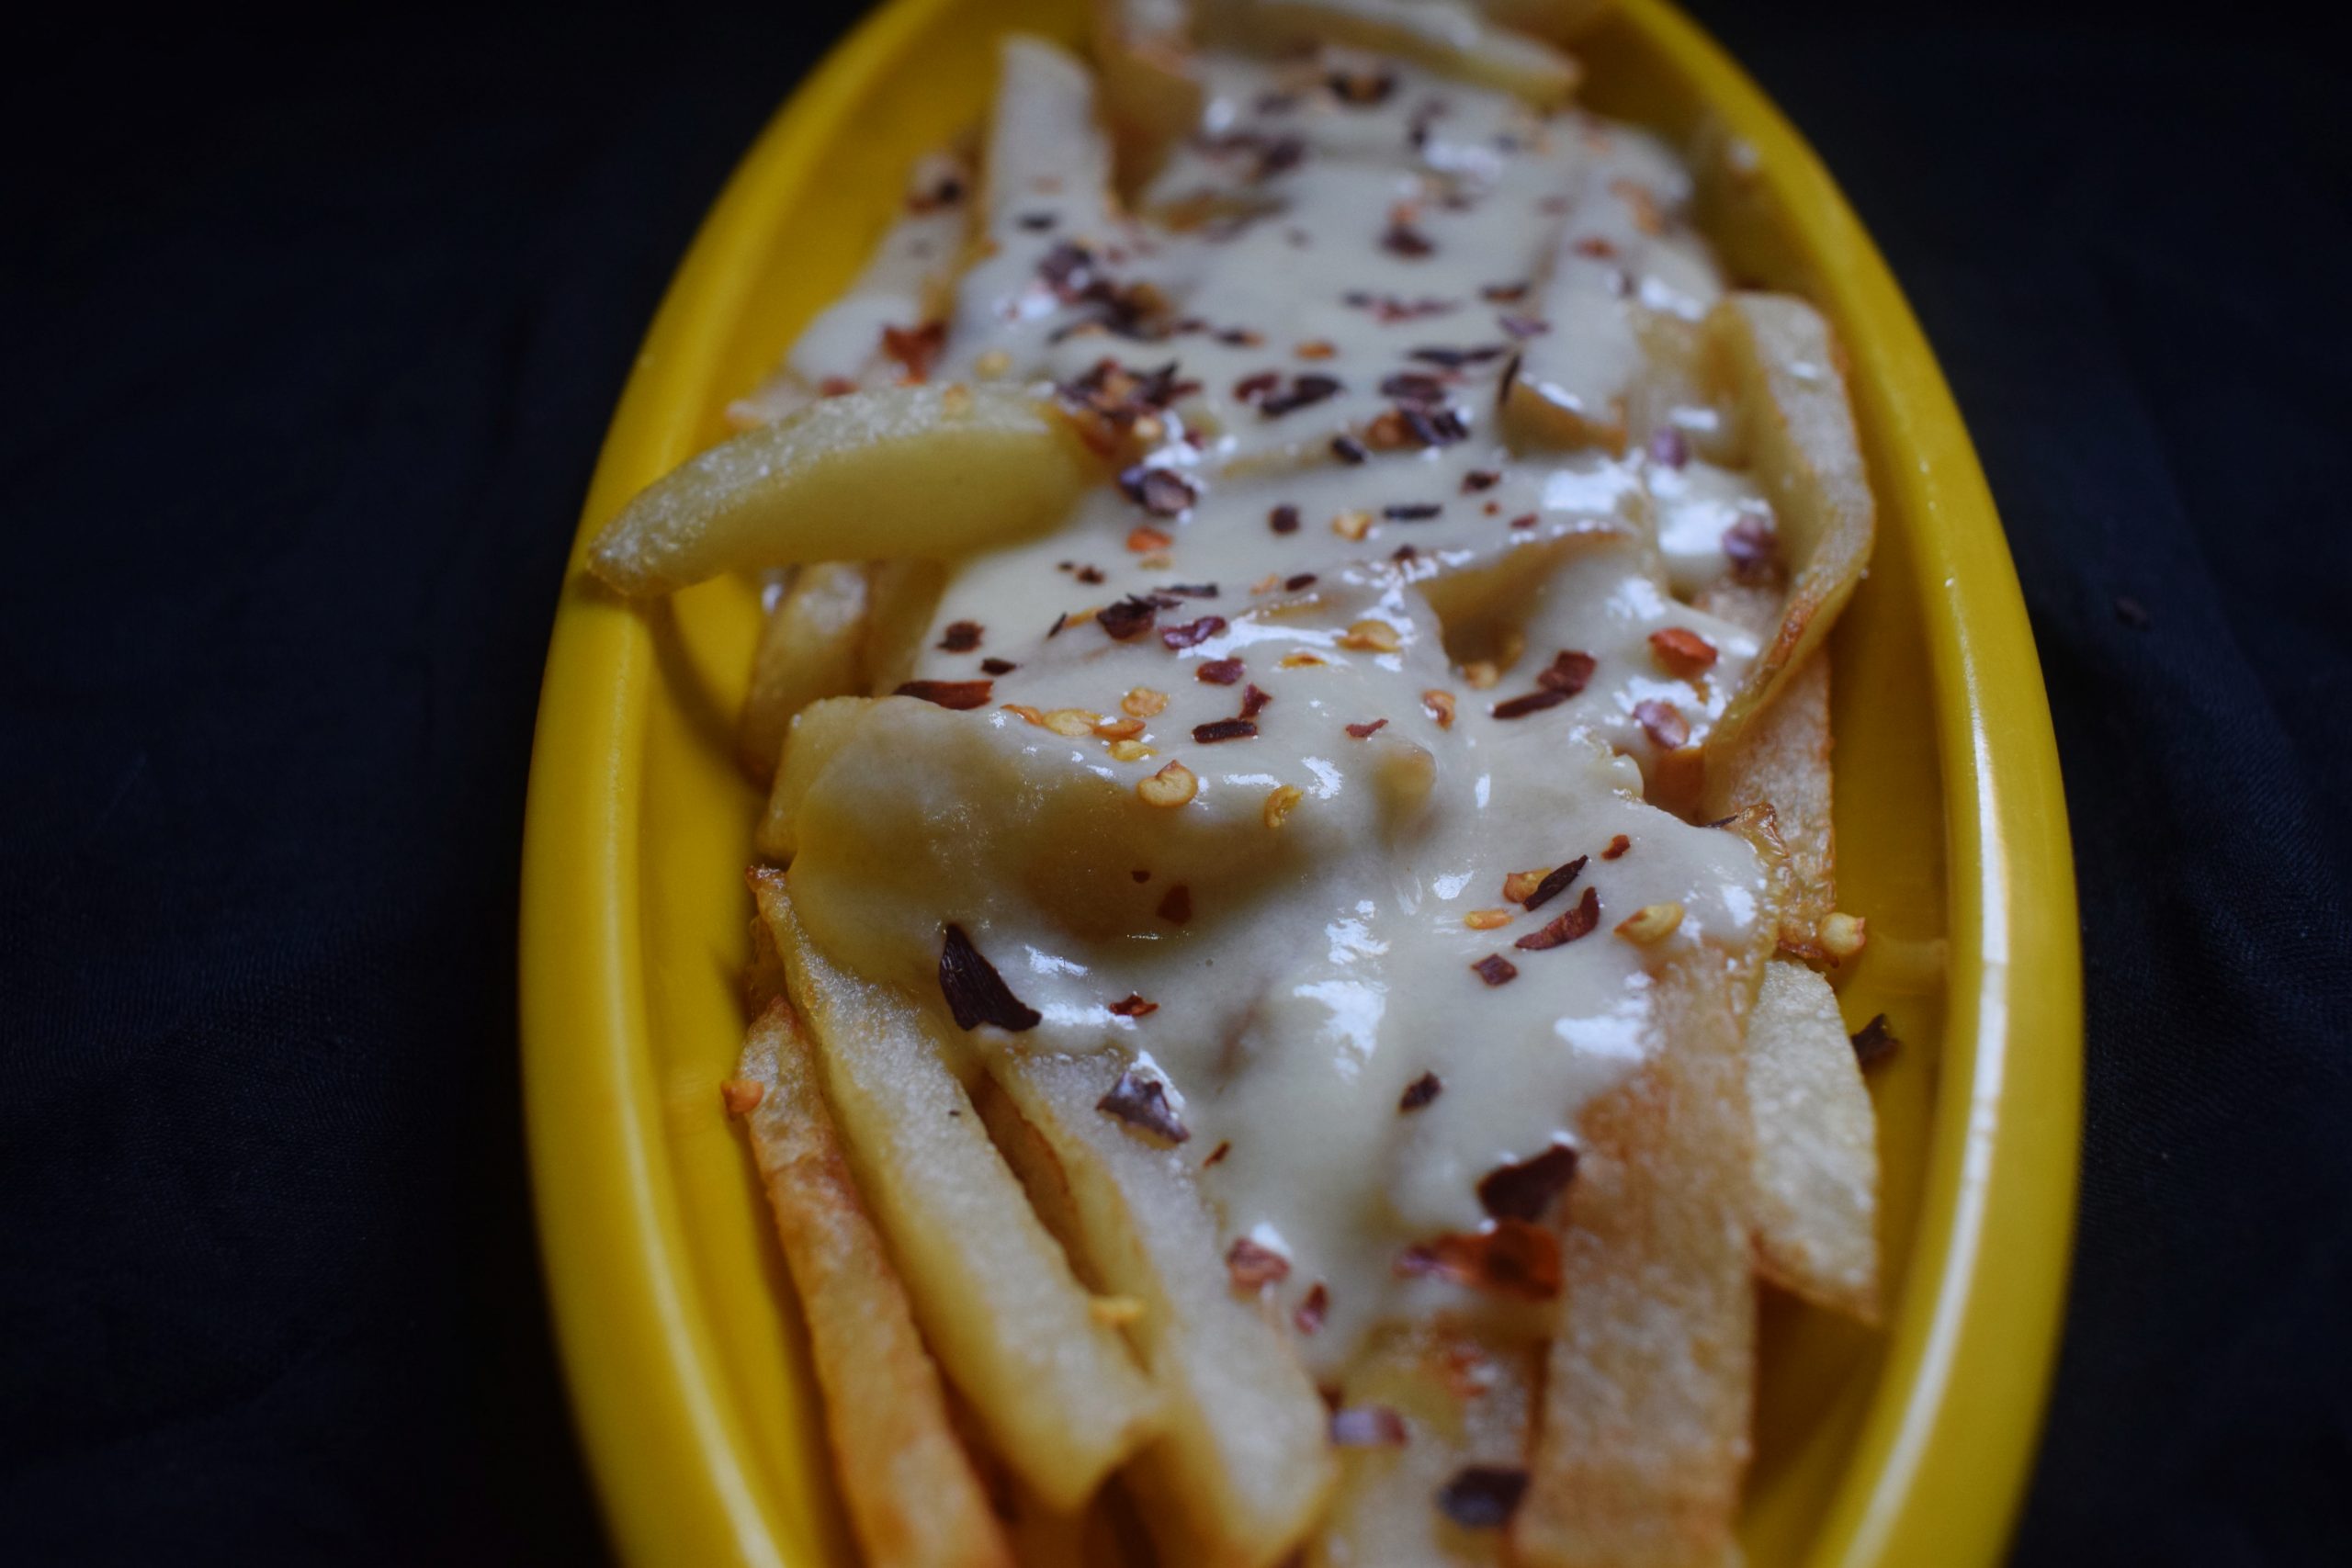 French fries in a plate